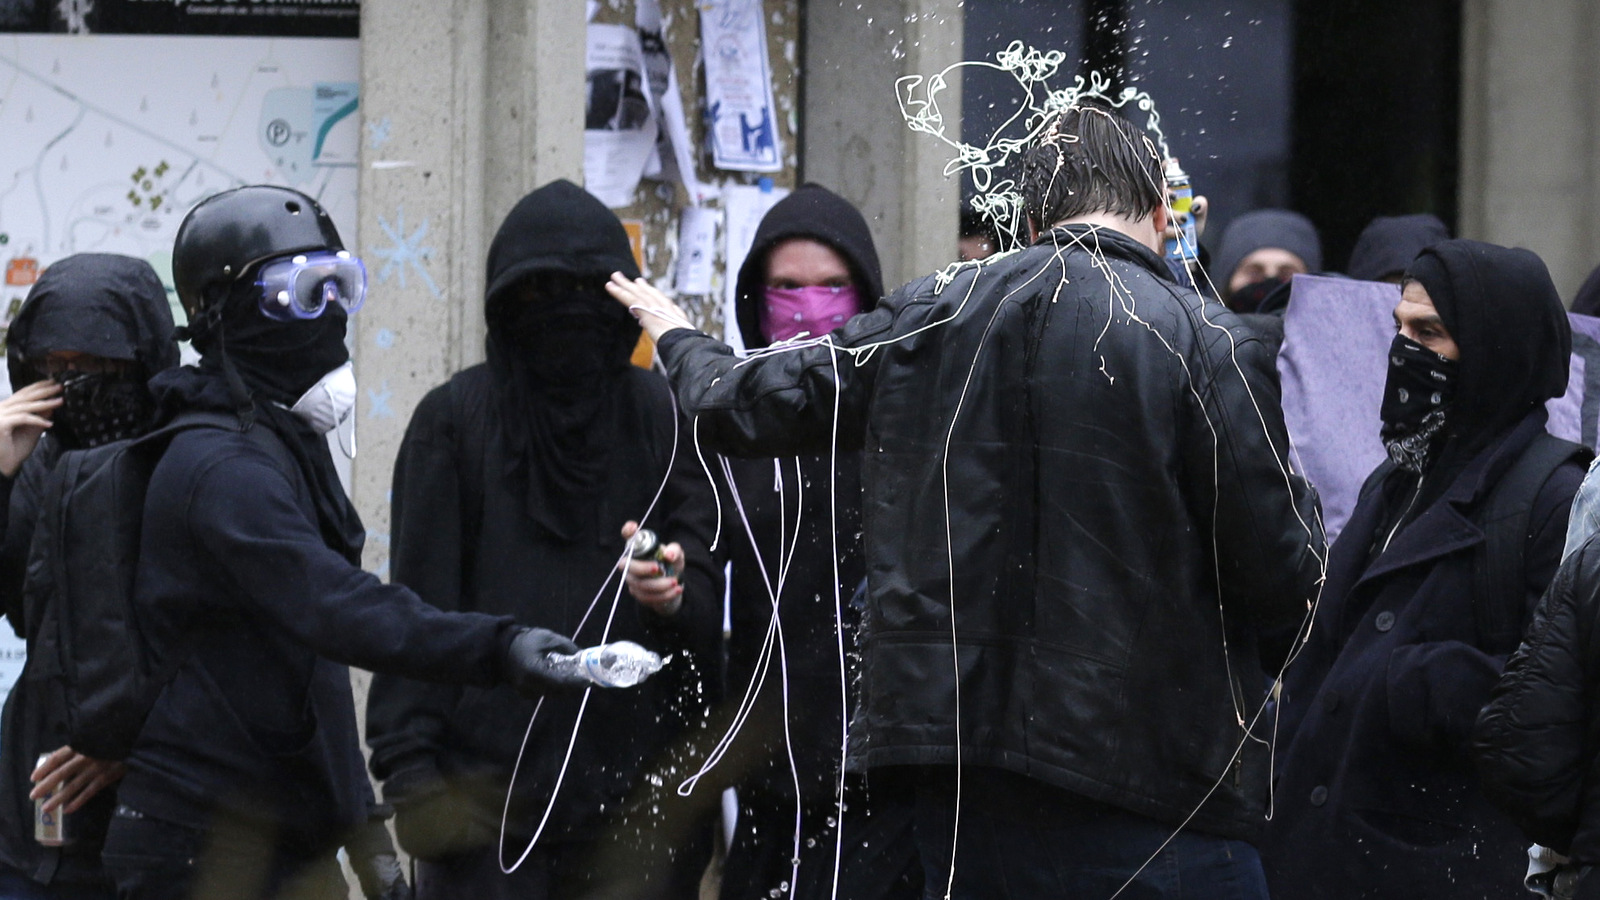 Counter-protesters spray a man who was filming them with a mobile phone with silly string and water, Thursday, June 15, 2017, during a protest by the conservative group Patriot Prayer at The Evergreen State College in Olympia, Wash. (AP/Ted S. Warren)